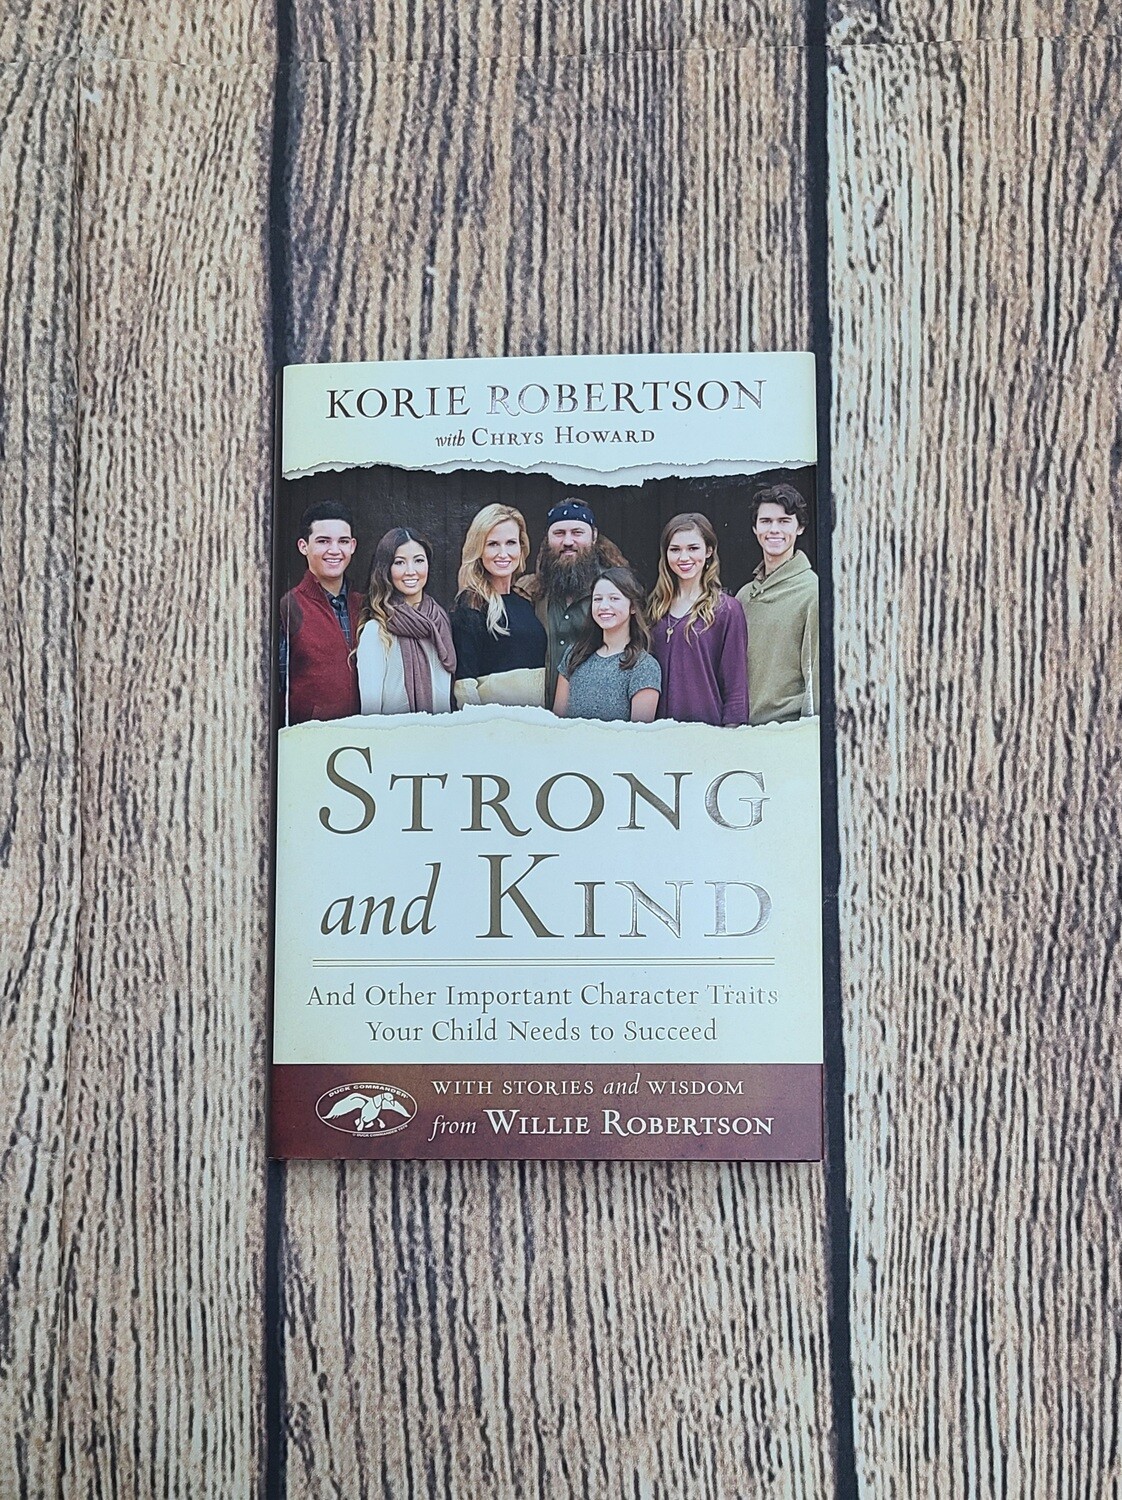 Strong and Kind by Korie Robertson with Chrys Howard